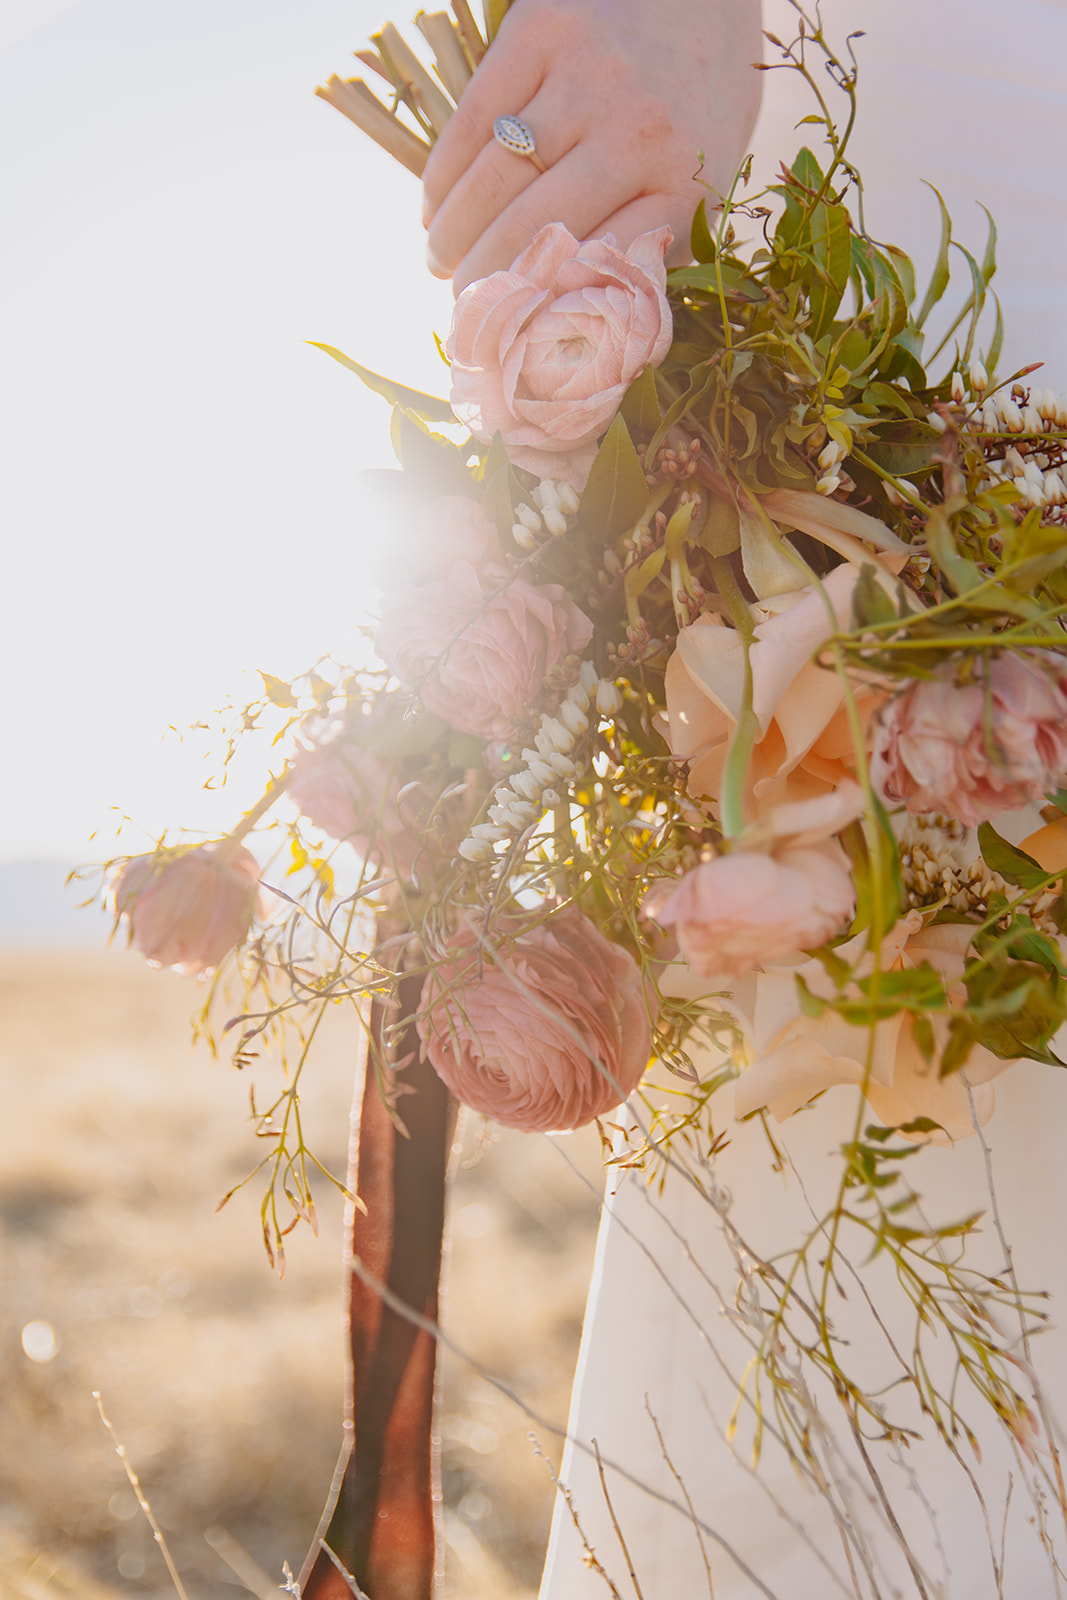 Bride holds bridal bouquet from a foxtails wyoming elopement package